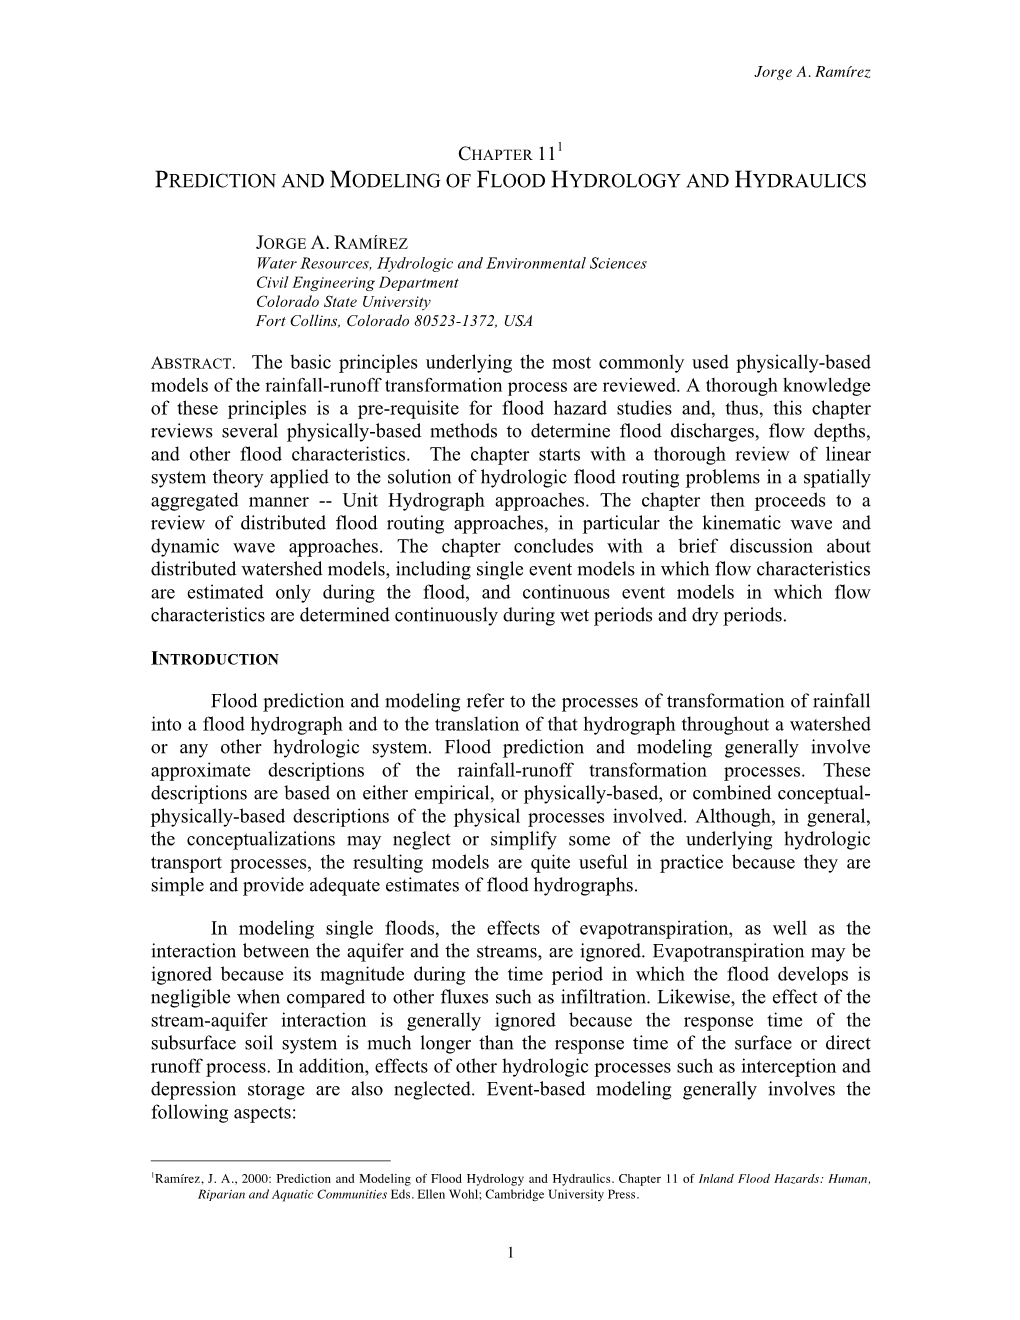 Prediction and Modeling of Flood Hydrology and Hydraulics